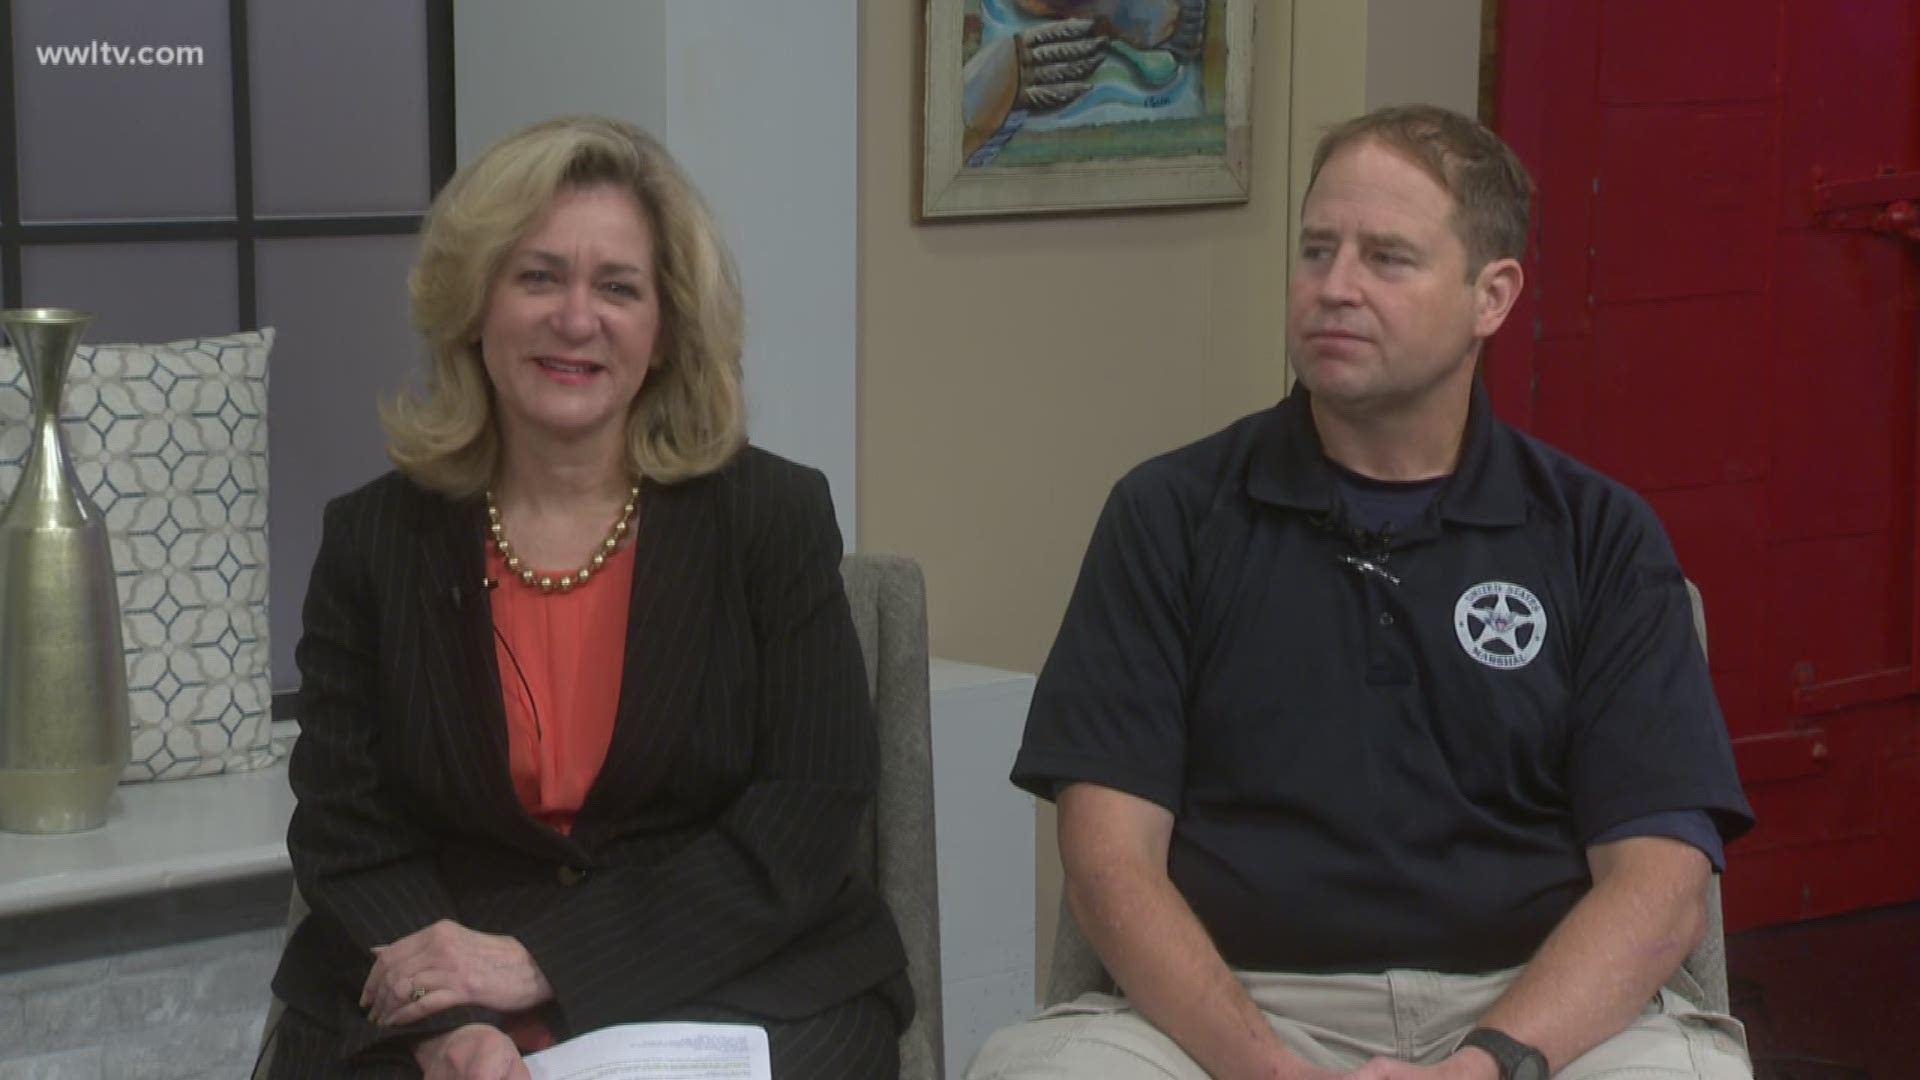 Darlene Cusanza from Crimestoppers and US Marshal Brian Fair are doing everything they can to protect children and make parents aware of predators this Halloween.